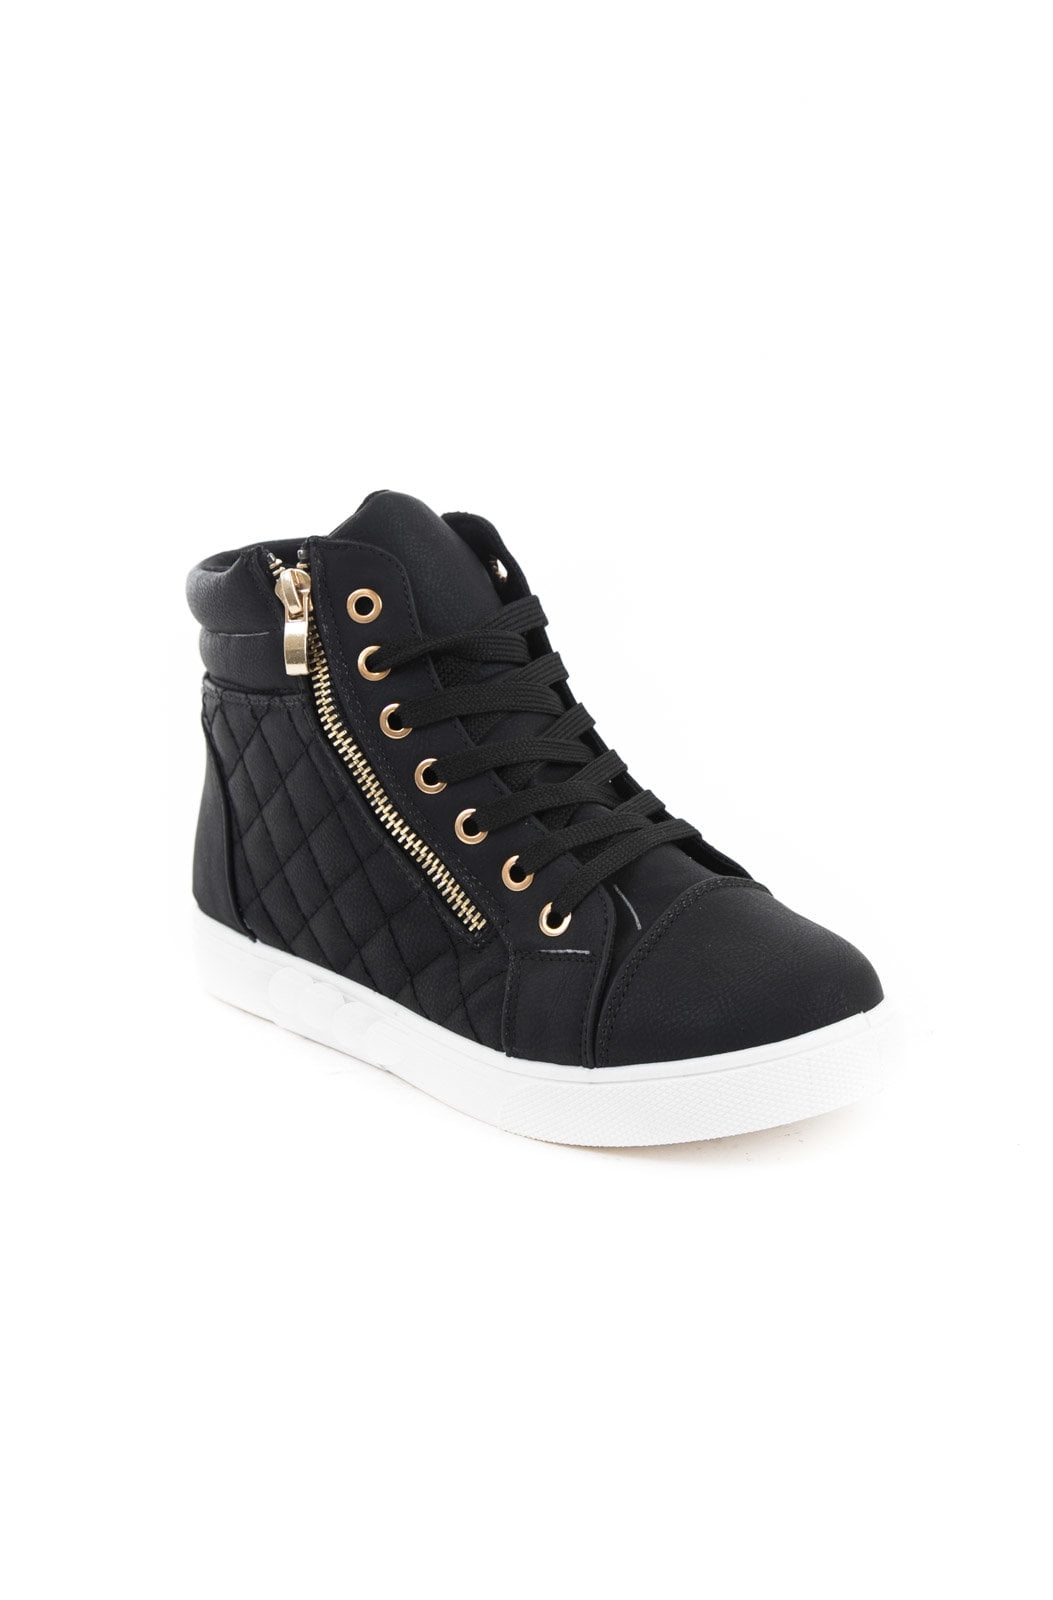 Soho Shoes Womens Leatherette Quilted Zipper Lace Up High Top Sneakers